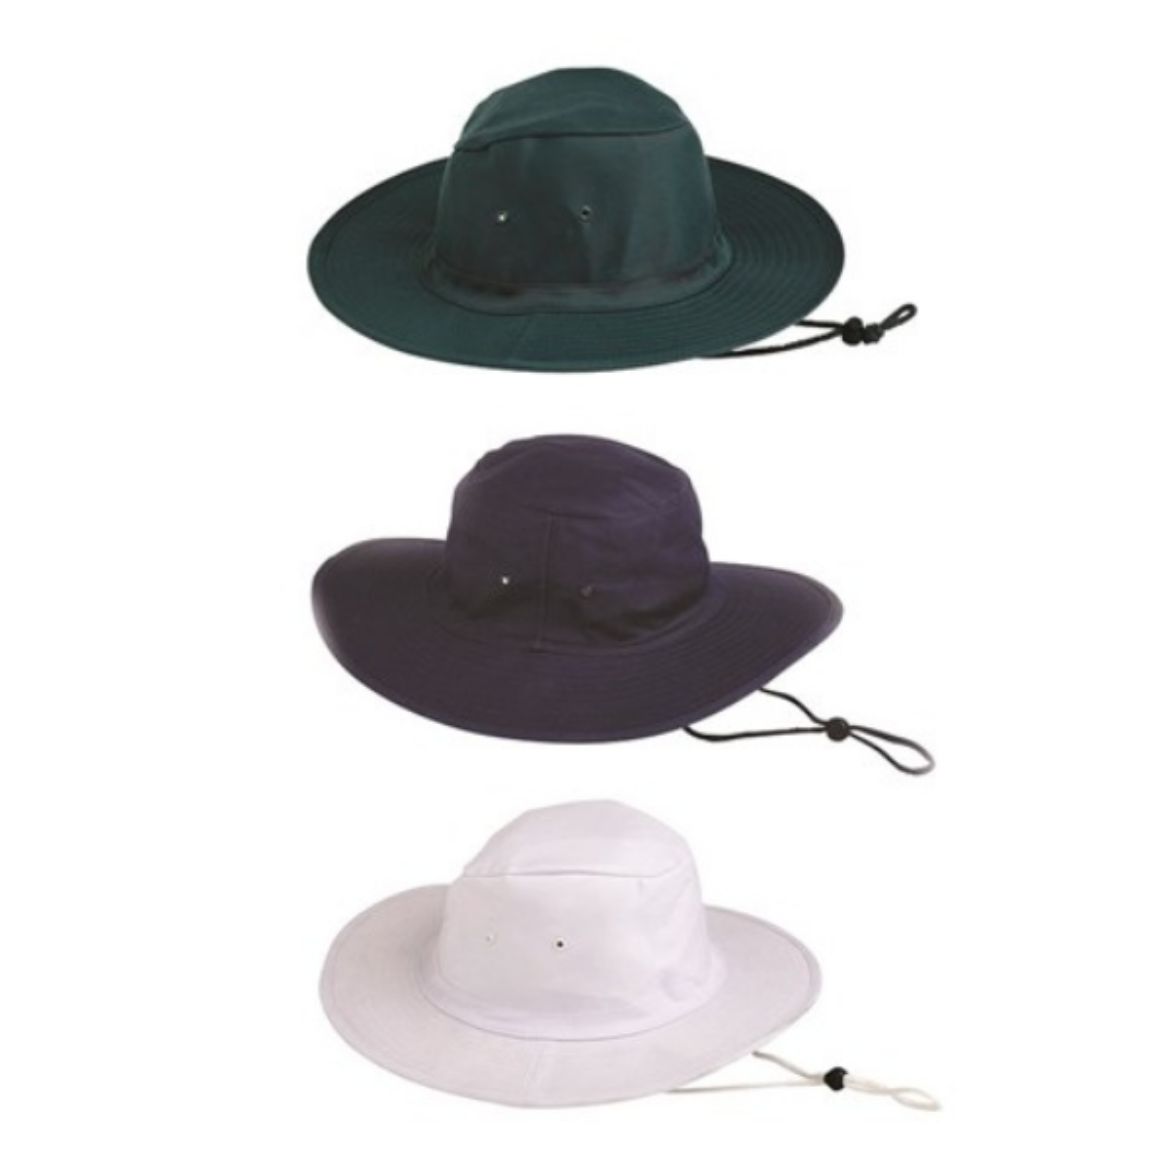 Picture of POLY / COTTON SUN HAT. AVAILABLE IN BLUE, GREEN, WHITE. AVAILABLE IN SIZES S/55CM, M/57CM, L/59CM, XL/61CM